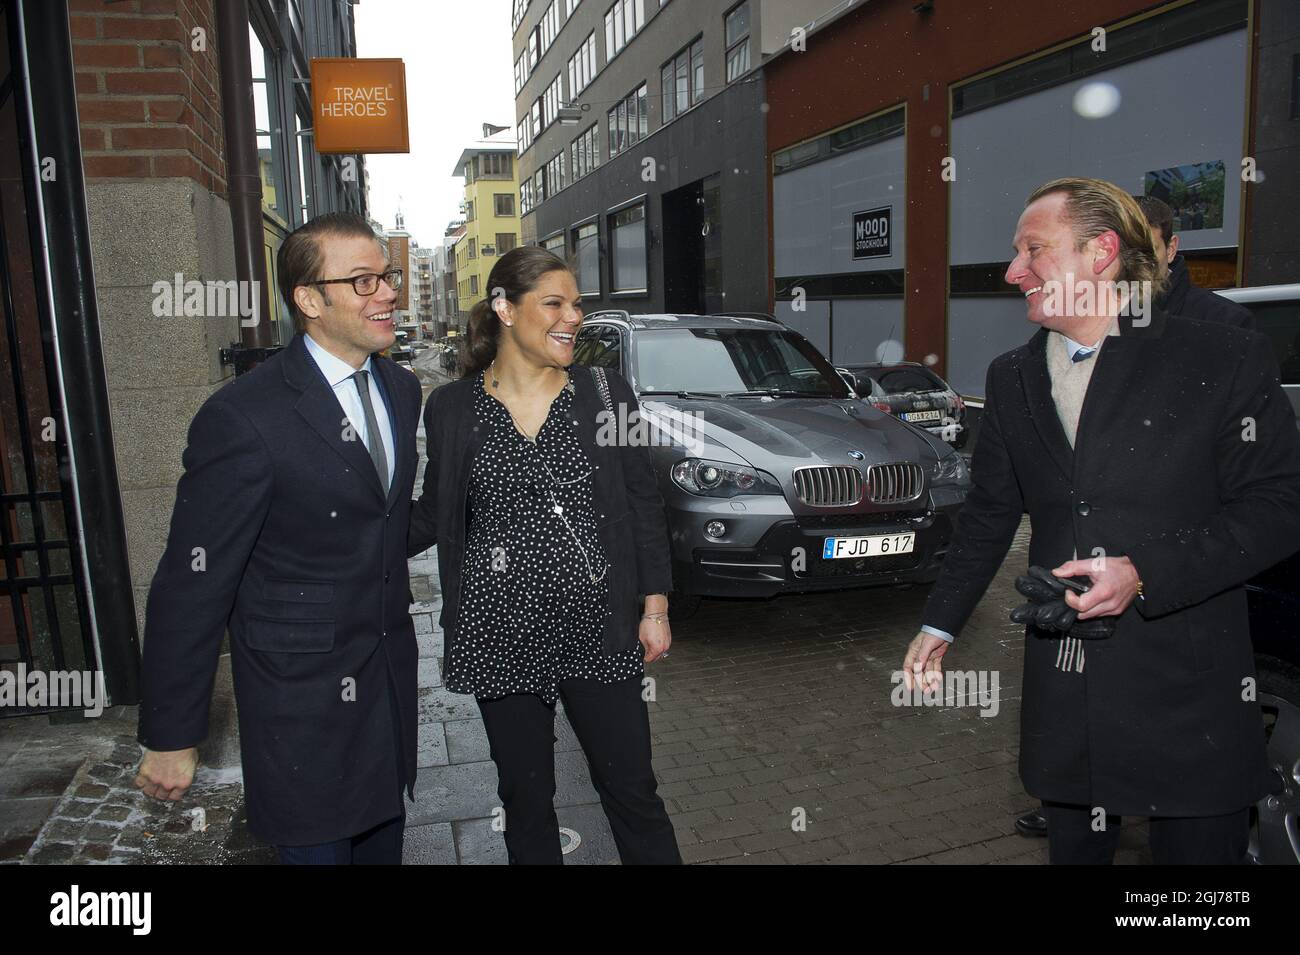 Crown Princess Victoria and Prince Daniel are seen arriving for a visit to the SNS - Centre for Business and Policy Studies in Stockholm, Sweden, February 9, 2012. This was the Royal couple's last official engagement together before the birth of the Royal baby. At right Johan T Lindwall, reporter at newspaper Expressen. Foto: Suvad Mrkonjic / XP / SCANPIX / kod 7116 **OUT SWEDEN OUT** Stock Photo